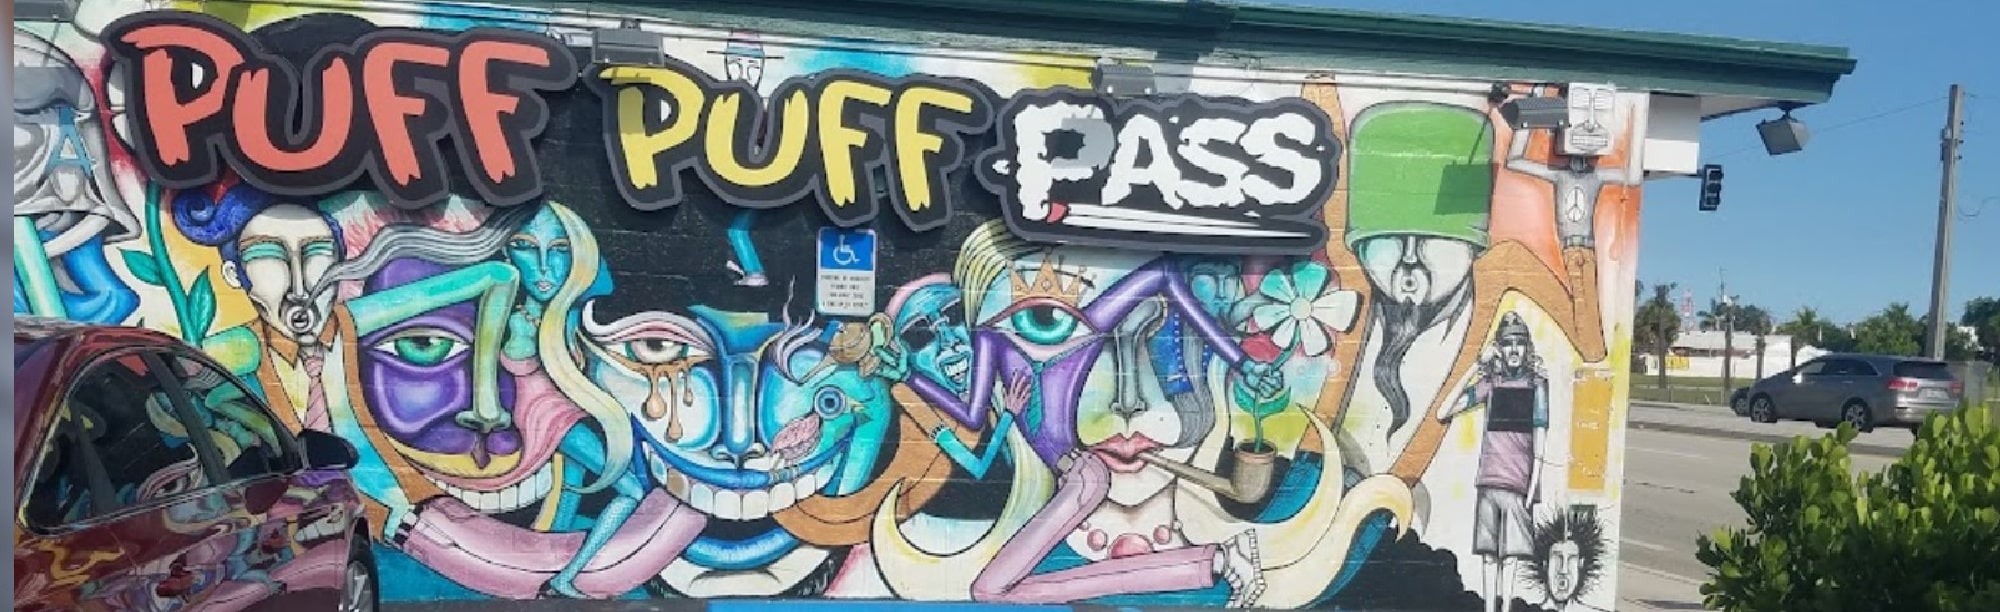 image of puff puff pass in lauderdale florida